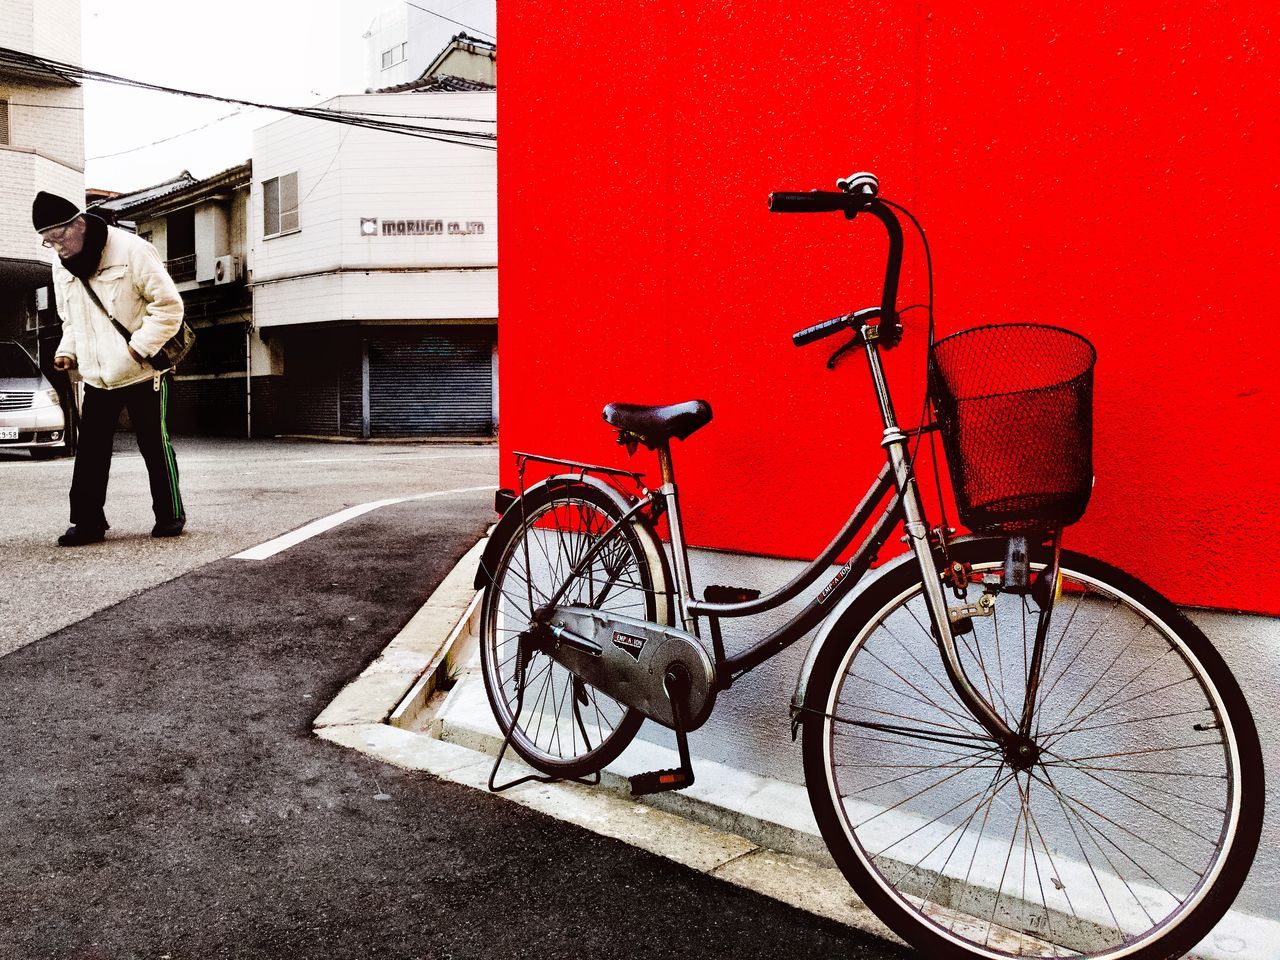 BICYCLE PARKED ON RED WALL